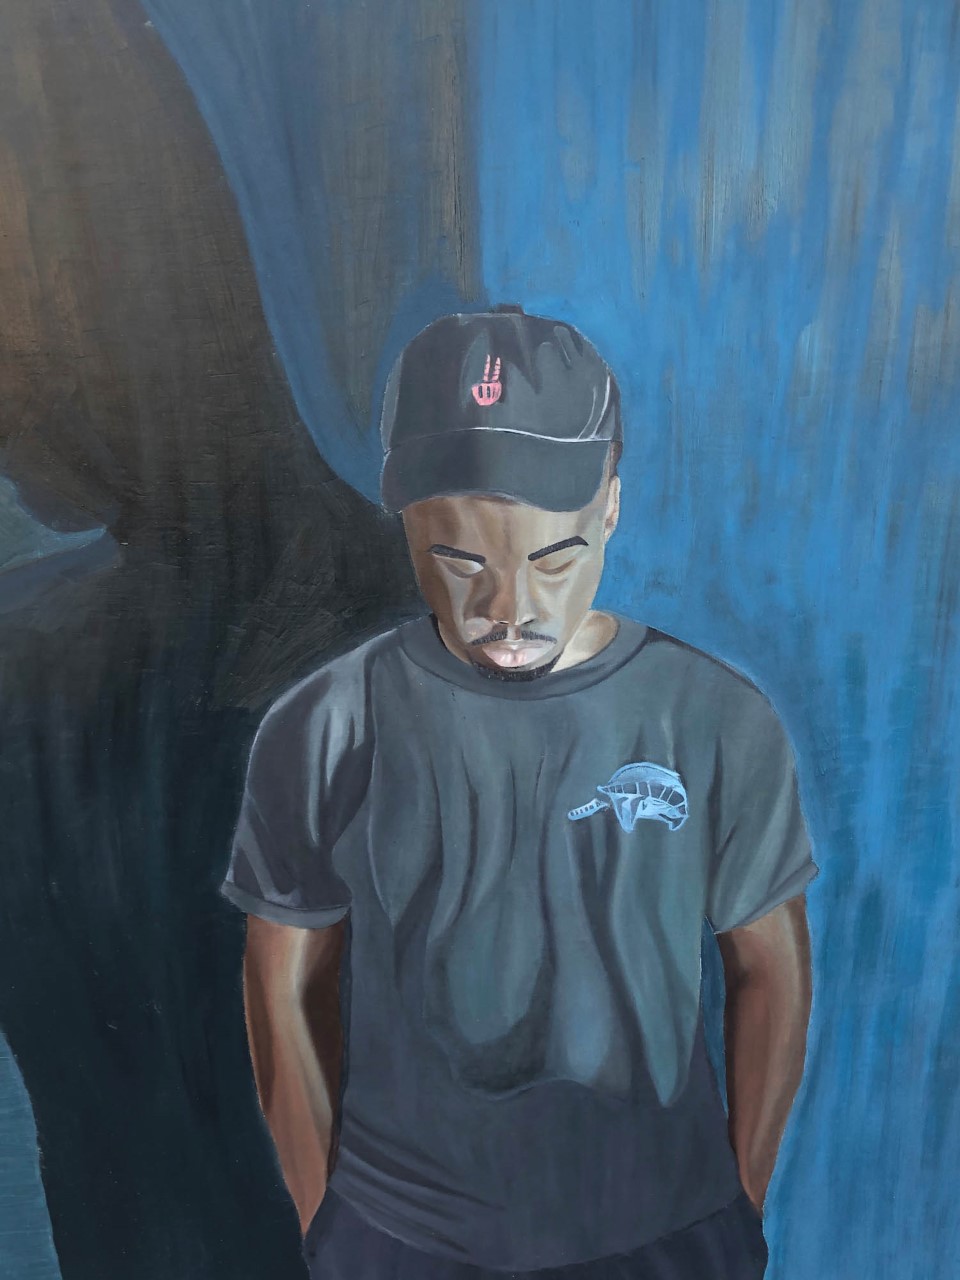 African American male friend emphasizing an emotion of calmness. Wearing a warm blue colored shirt, with dark black colored pants. Incorporating multiple areas of warm tone blues onto the skin of the face, neck, hands, and arms. Also, having a shade silhouette behind the male figure. Warm and cool tones of blues on the background to compliment both the figure and the emotion of calmness. Detailed and textural areas within the shirt, shorts, arms, face, and background. 